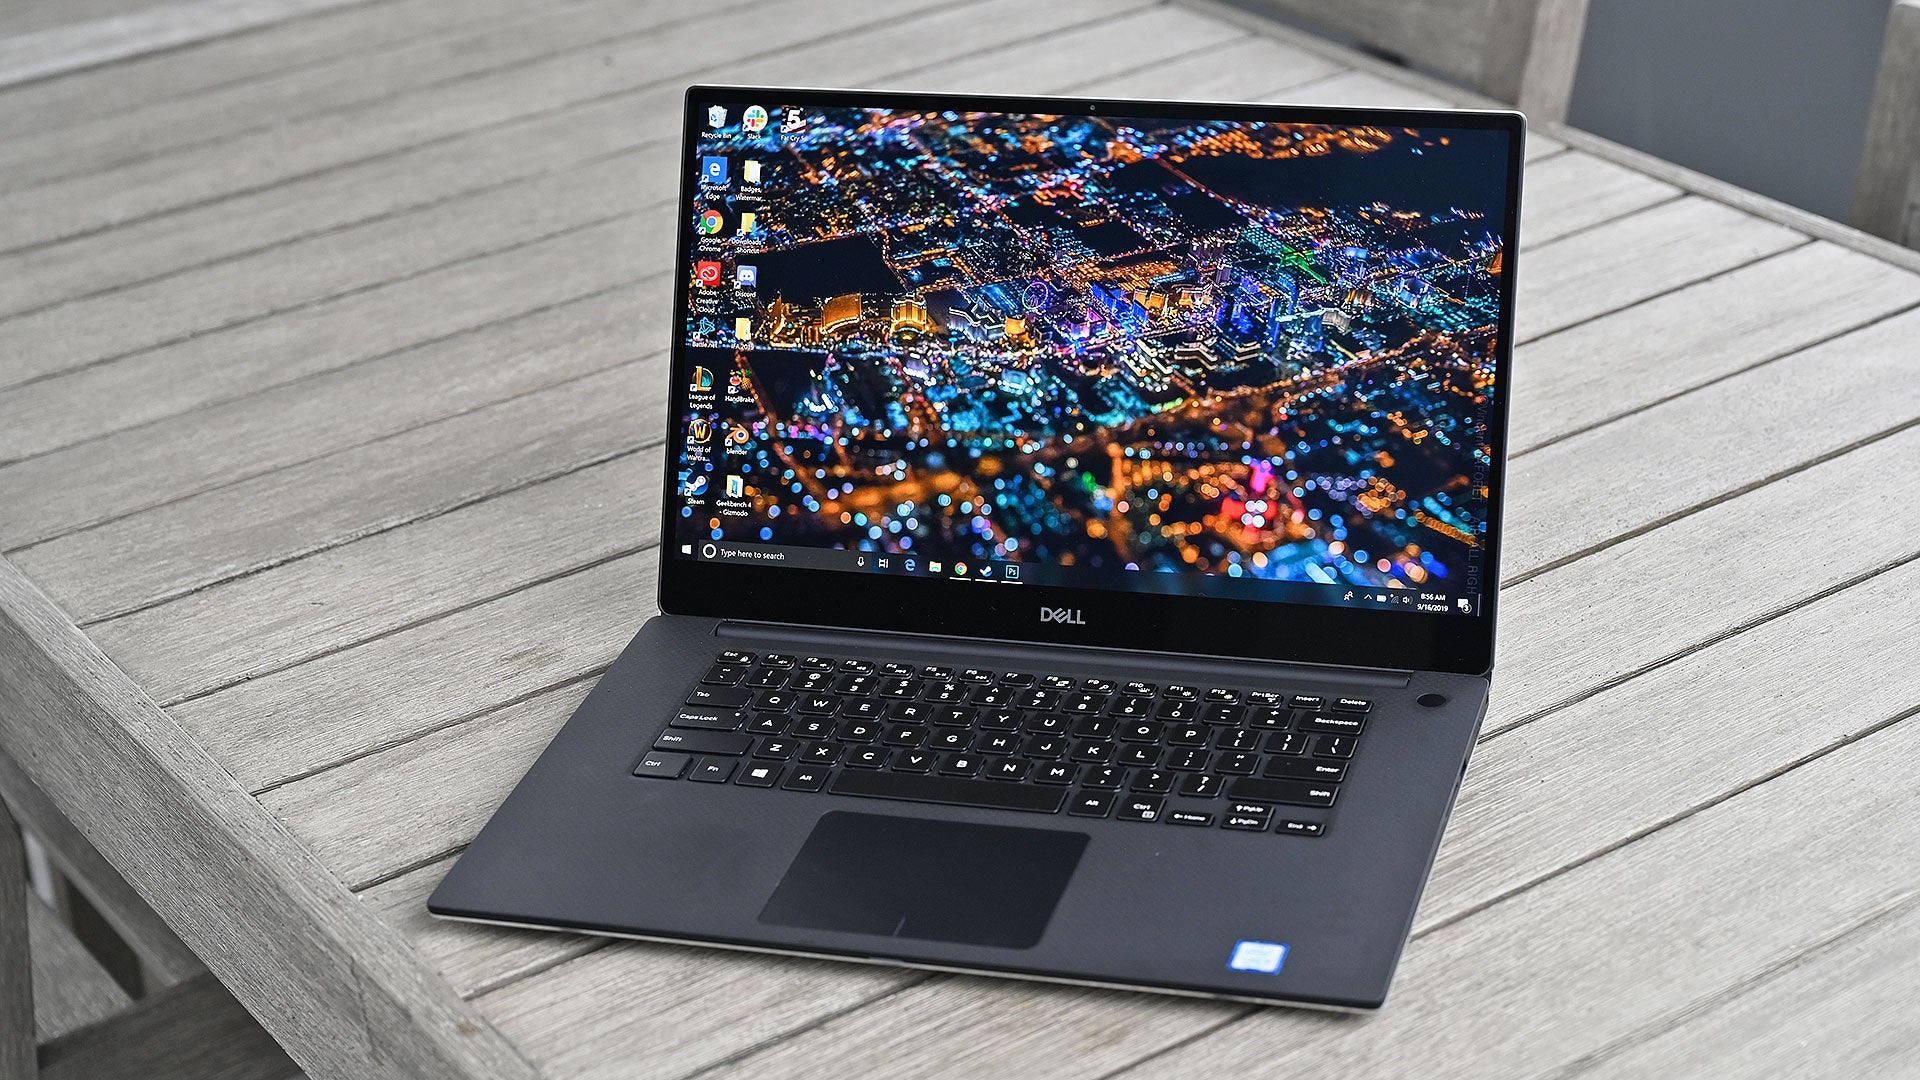 Dell XPS 15 Review: A Really Good Laptop For Almost Everything